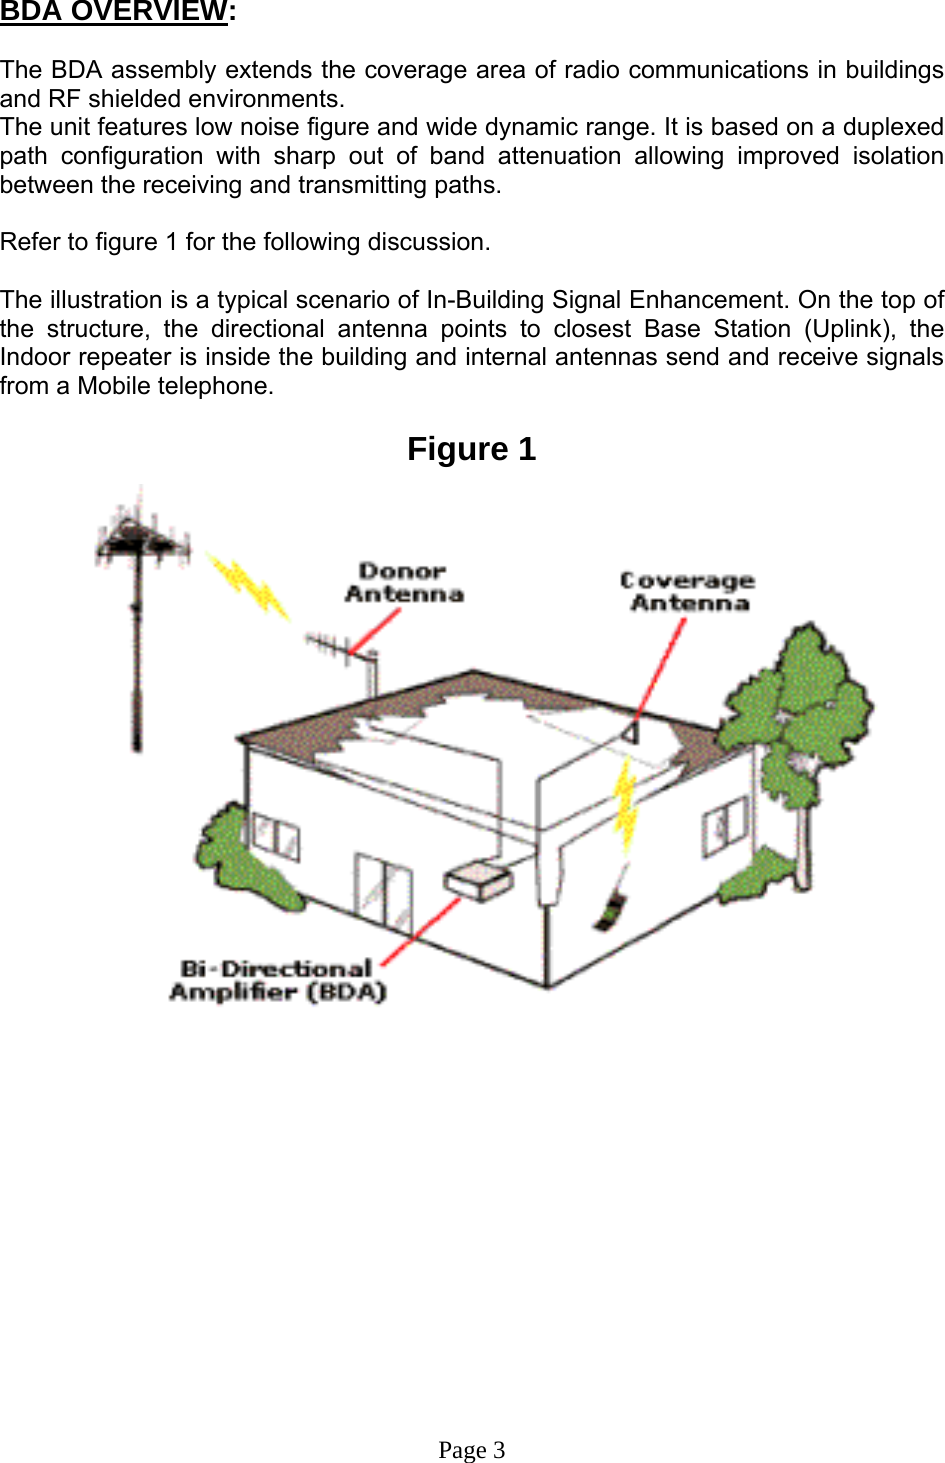 BDA OVERVIEW:  The BDA assembly extends the coverage area of radio communications in buildings and RF shielded environments. The unit features low noise figure and wide dynamic range. It is based on a duplexed path configuration with sharp out of band attenuation allowing improved isolation between the receiving and transmitting paths.  Refer to figure 1 for the following discussion.  The illustration is a typical scenario of In-Building Signal Enhancement. On the top of the structure, the directional antenna points to closest Base Station (Uplink), the Indoor repeater is inside the building and internal antennas send and receive signals from a Mobile telephone.   Figure 1                               Page 3 